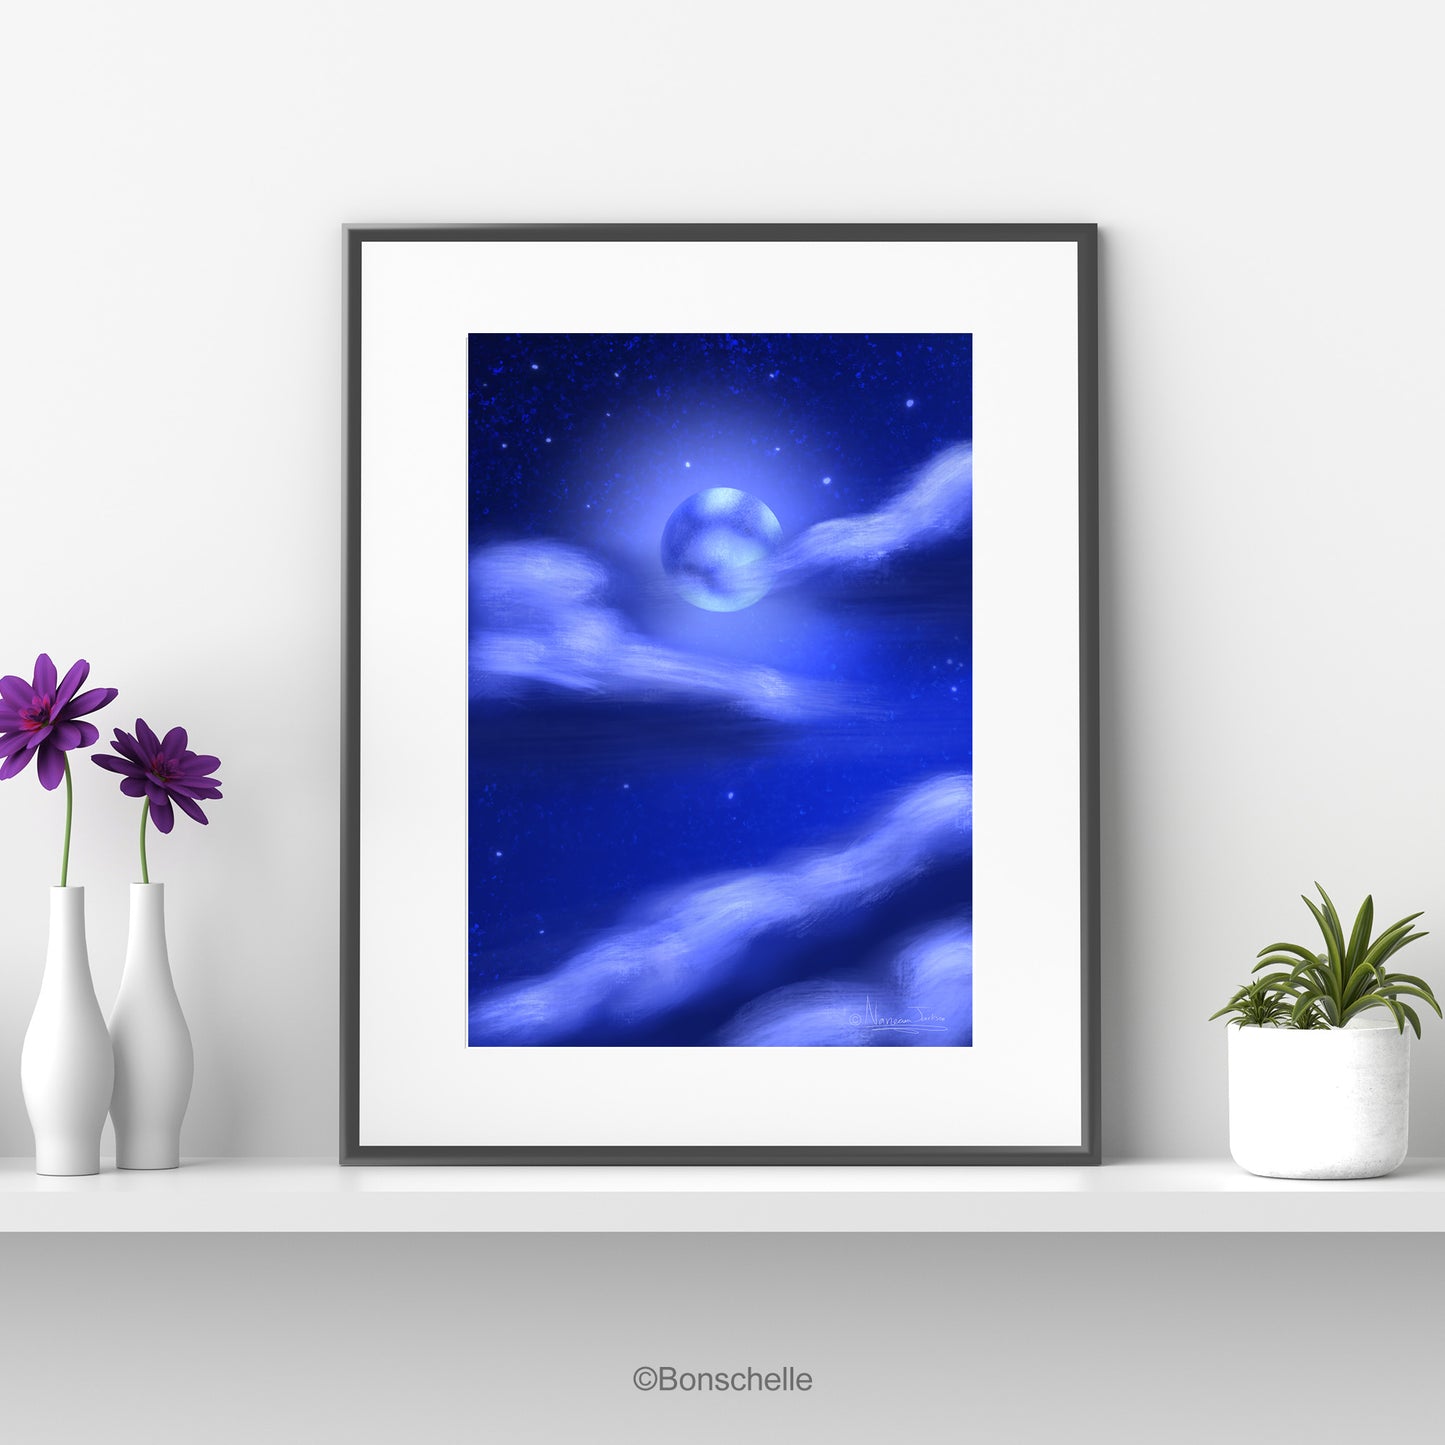 Original Art poster print with image of the Night Sky with full moon and clouds, mounted on a white background with a black frame and standing on a white shelf with flowerpots each side.